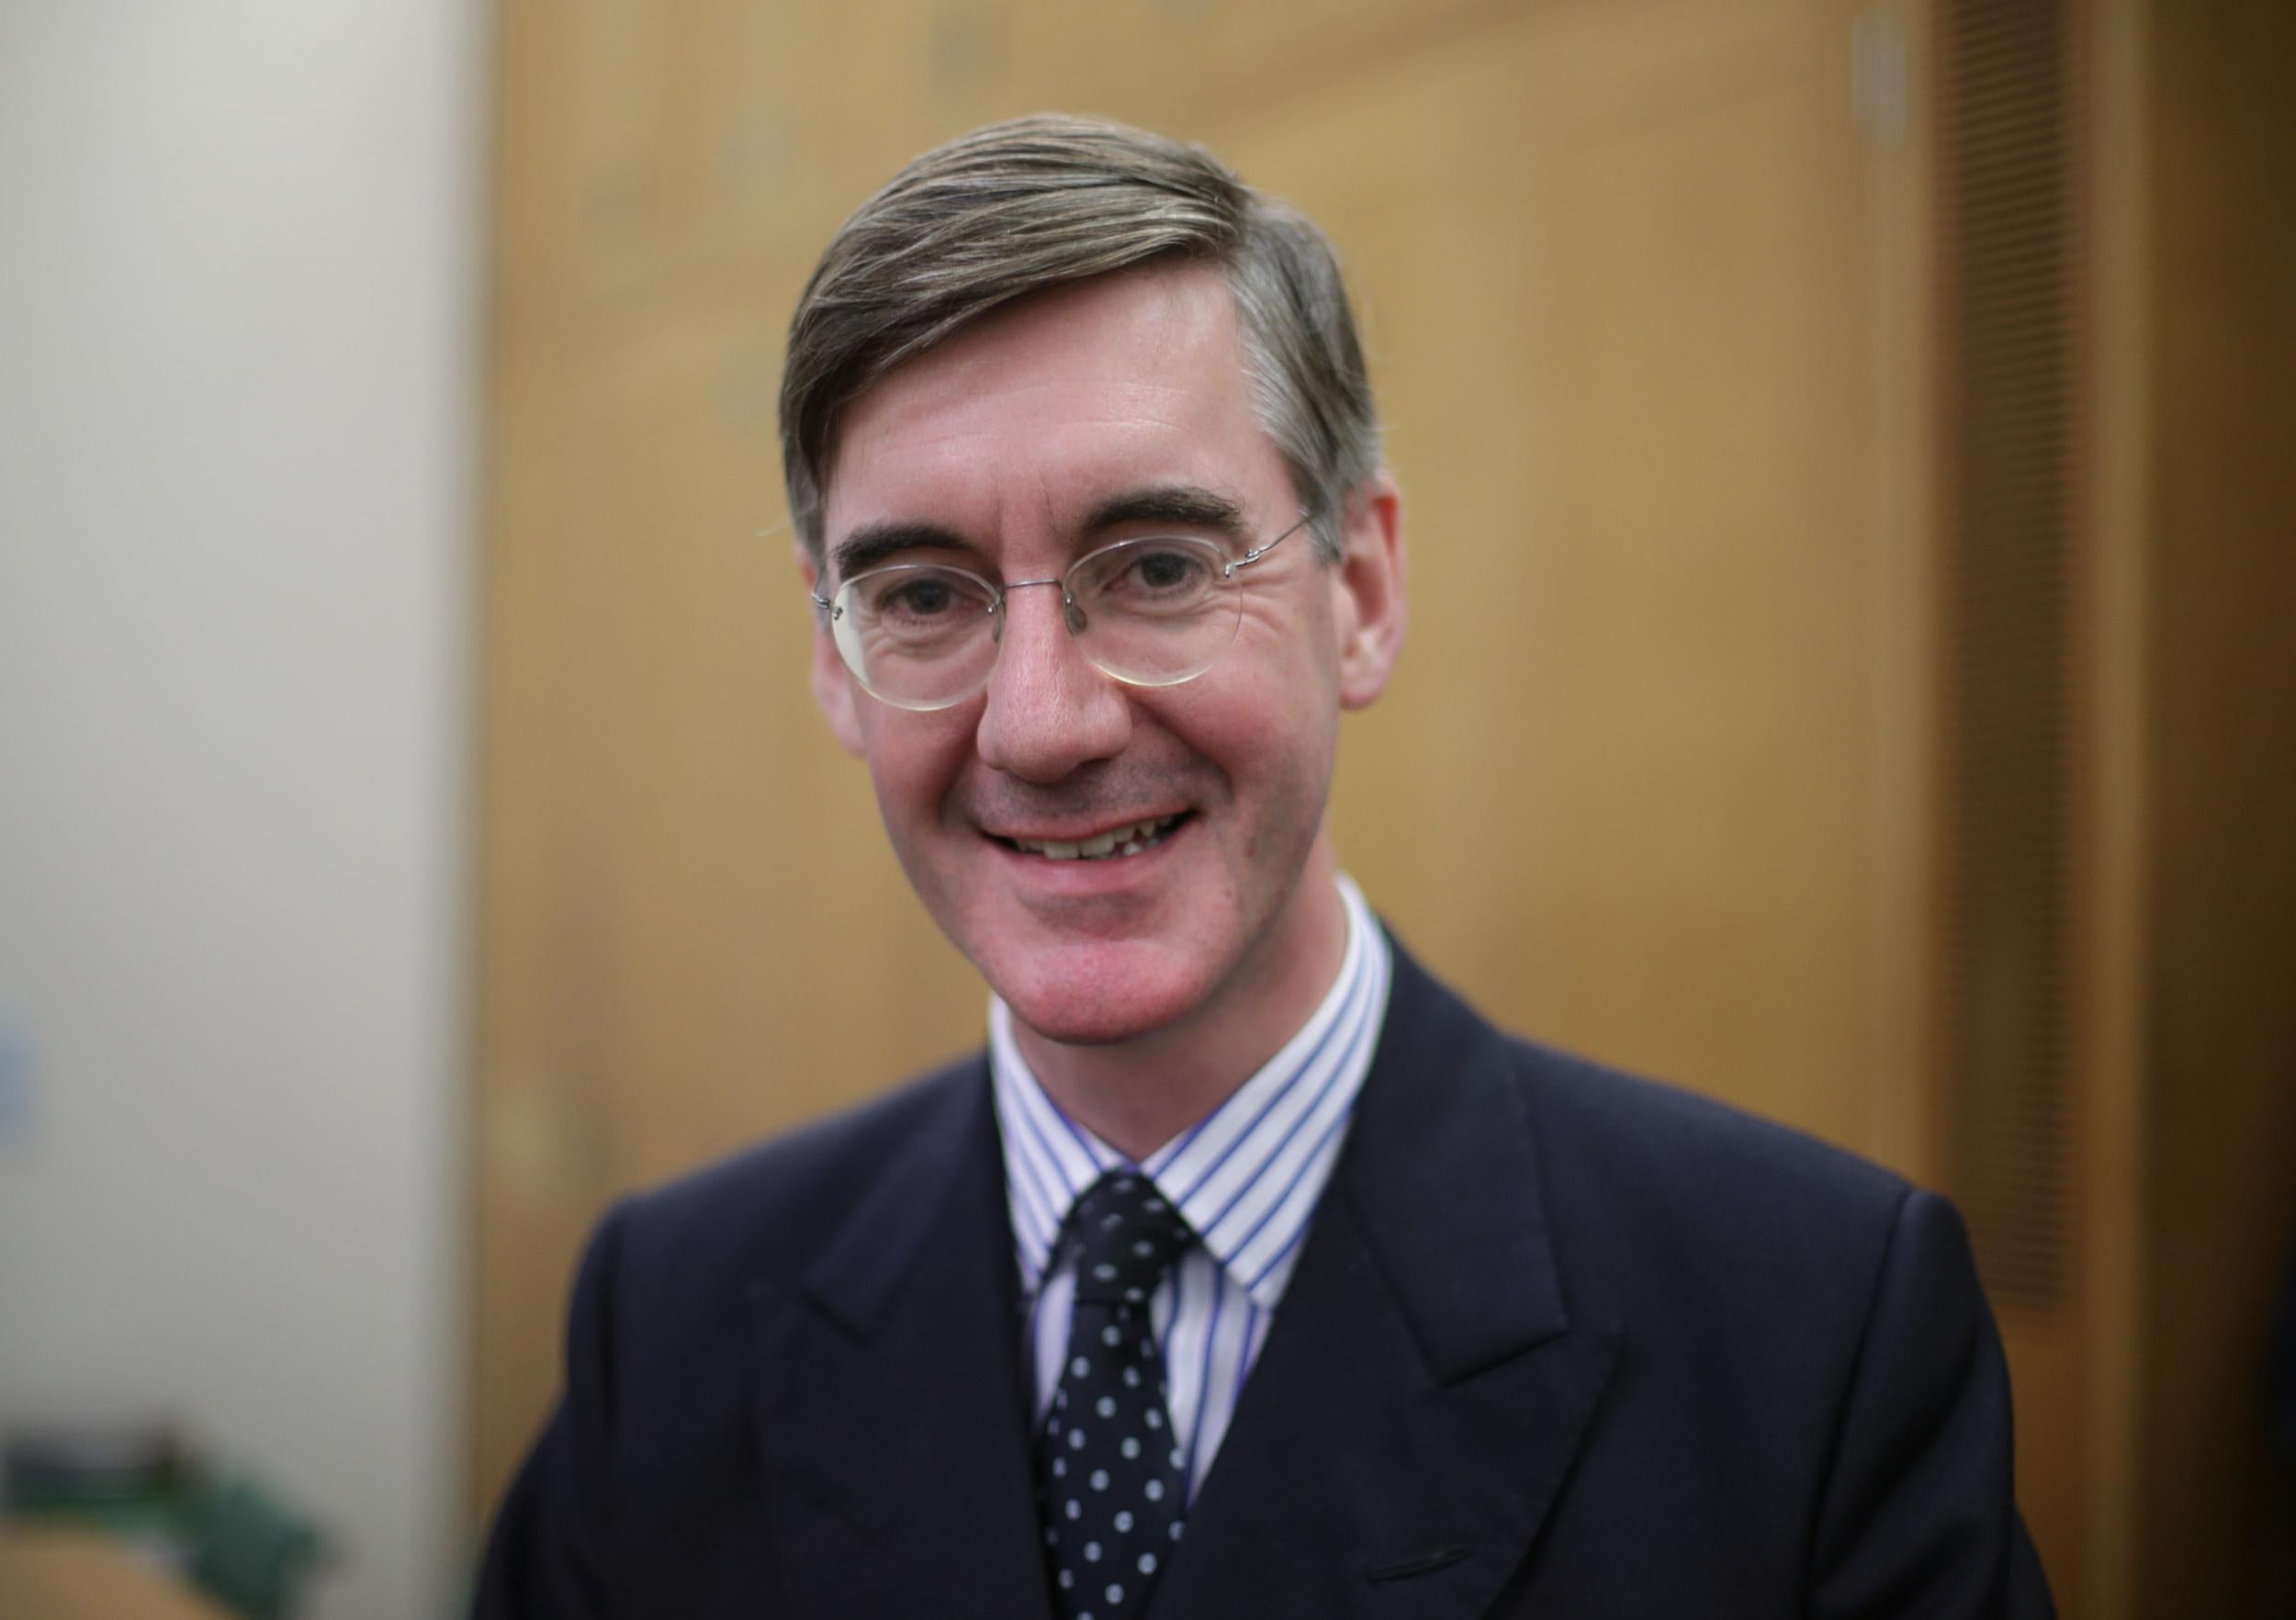 Jacob Rees-Mogg is the bookies’ favourite to succeed Theresa May